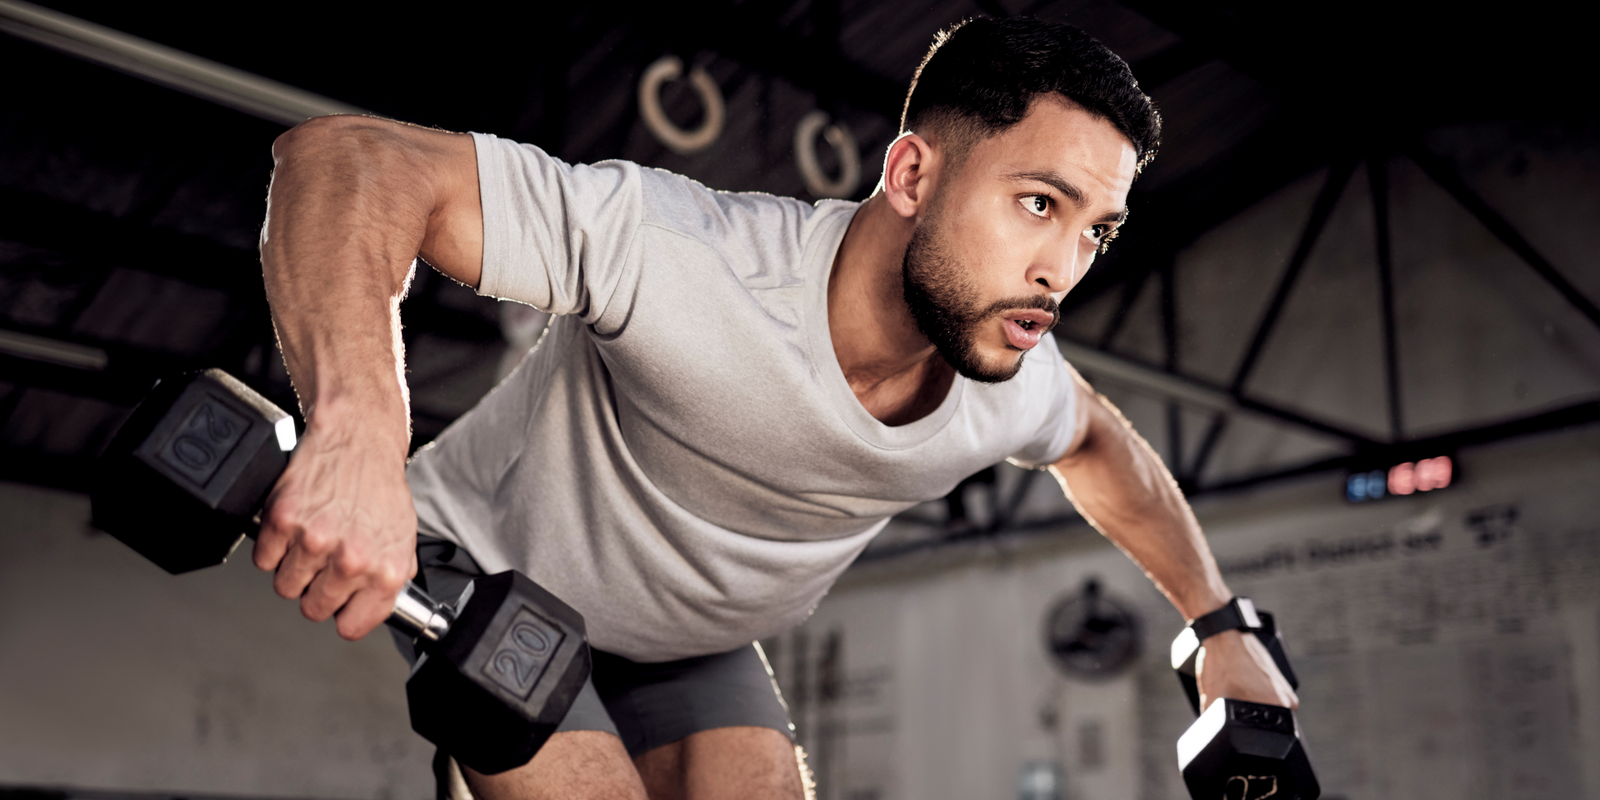 Get Pumped With This 15-Minute Testosterone-Boosting Workout